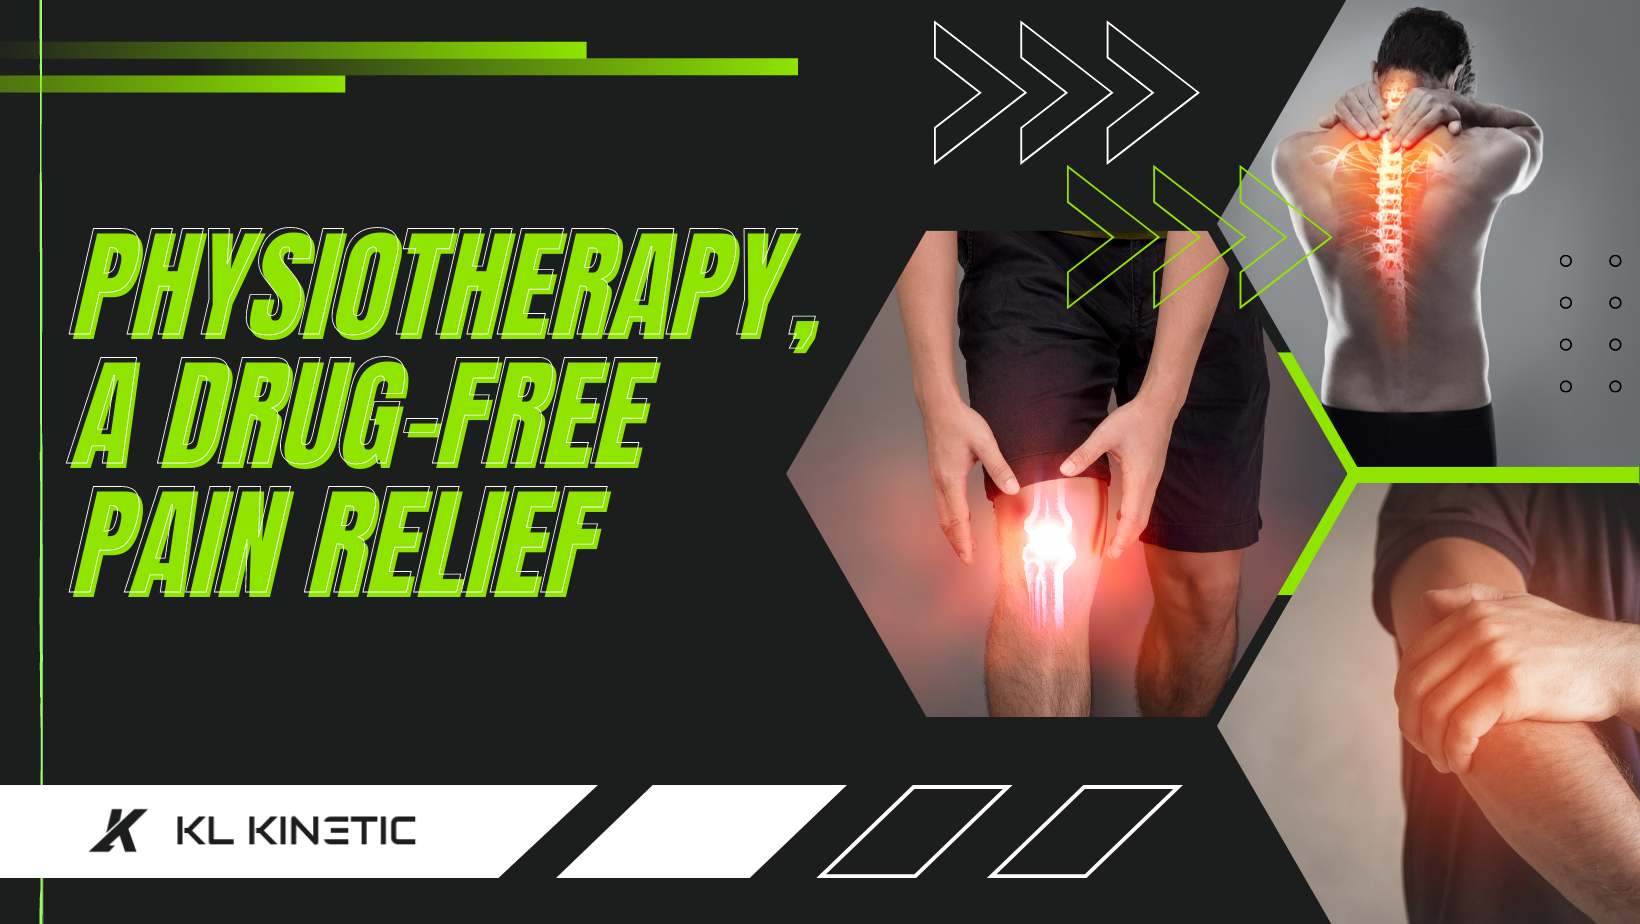 Physiotherapy, a drug-free pain relief